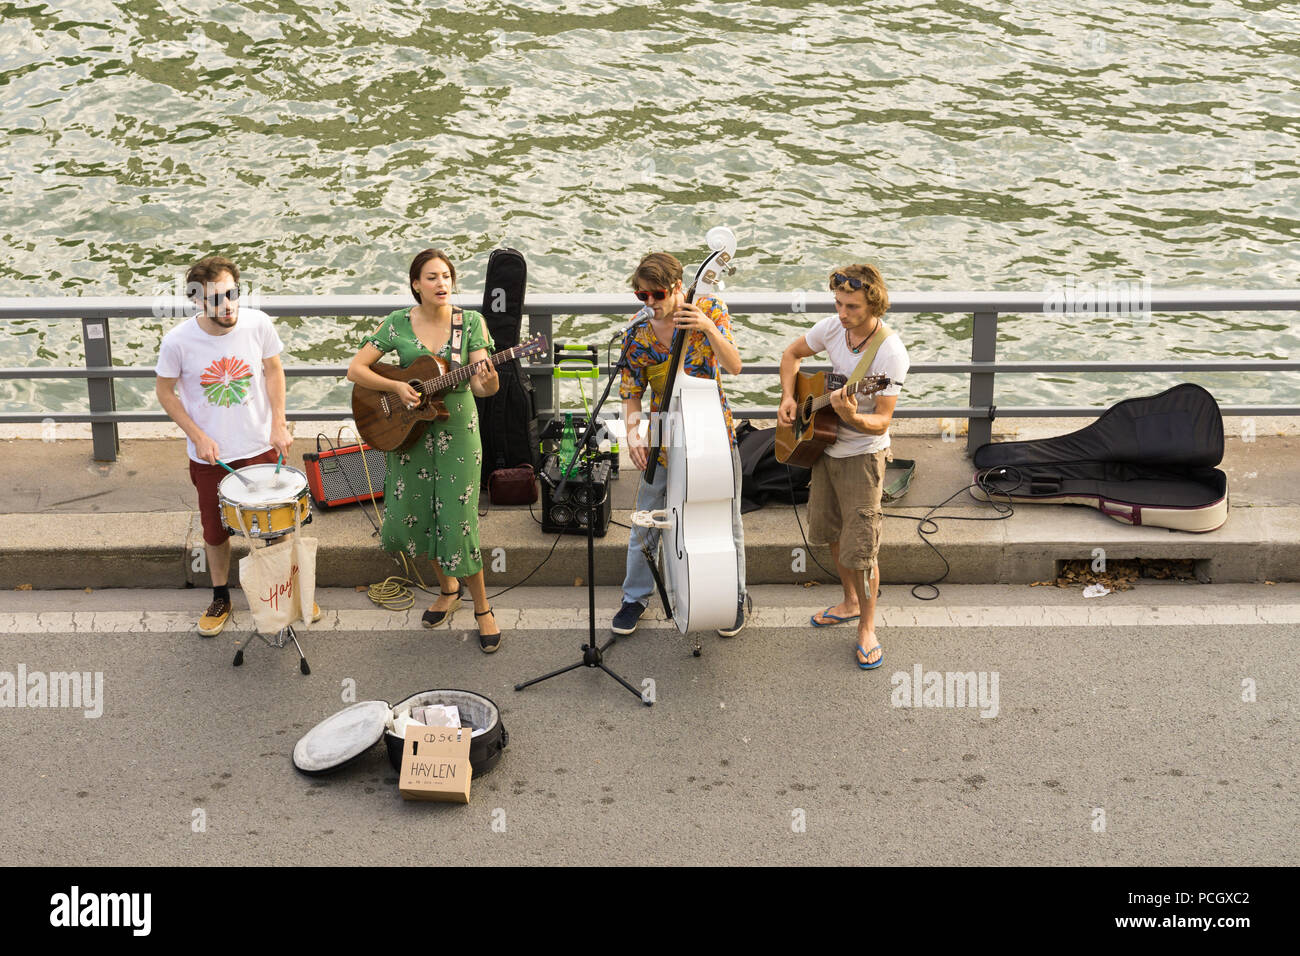 Paris street music band - Street musicians playing at the embankment of the Seine River in Paris, France, Europe. Stock Photo